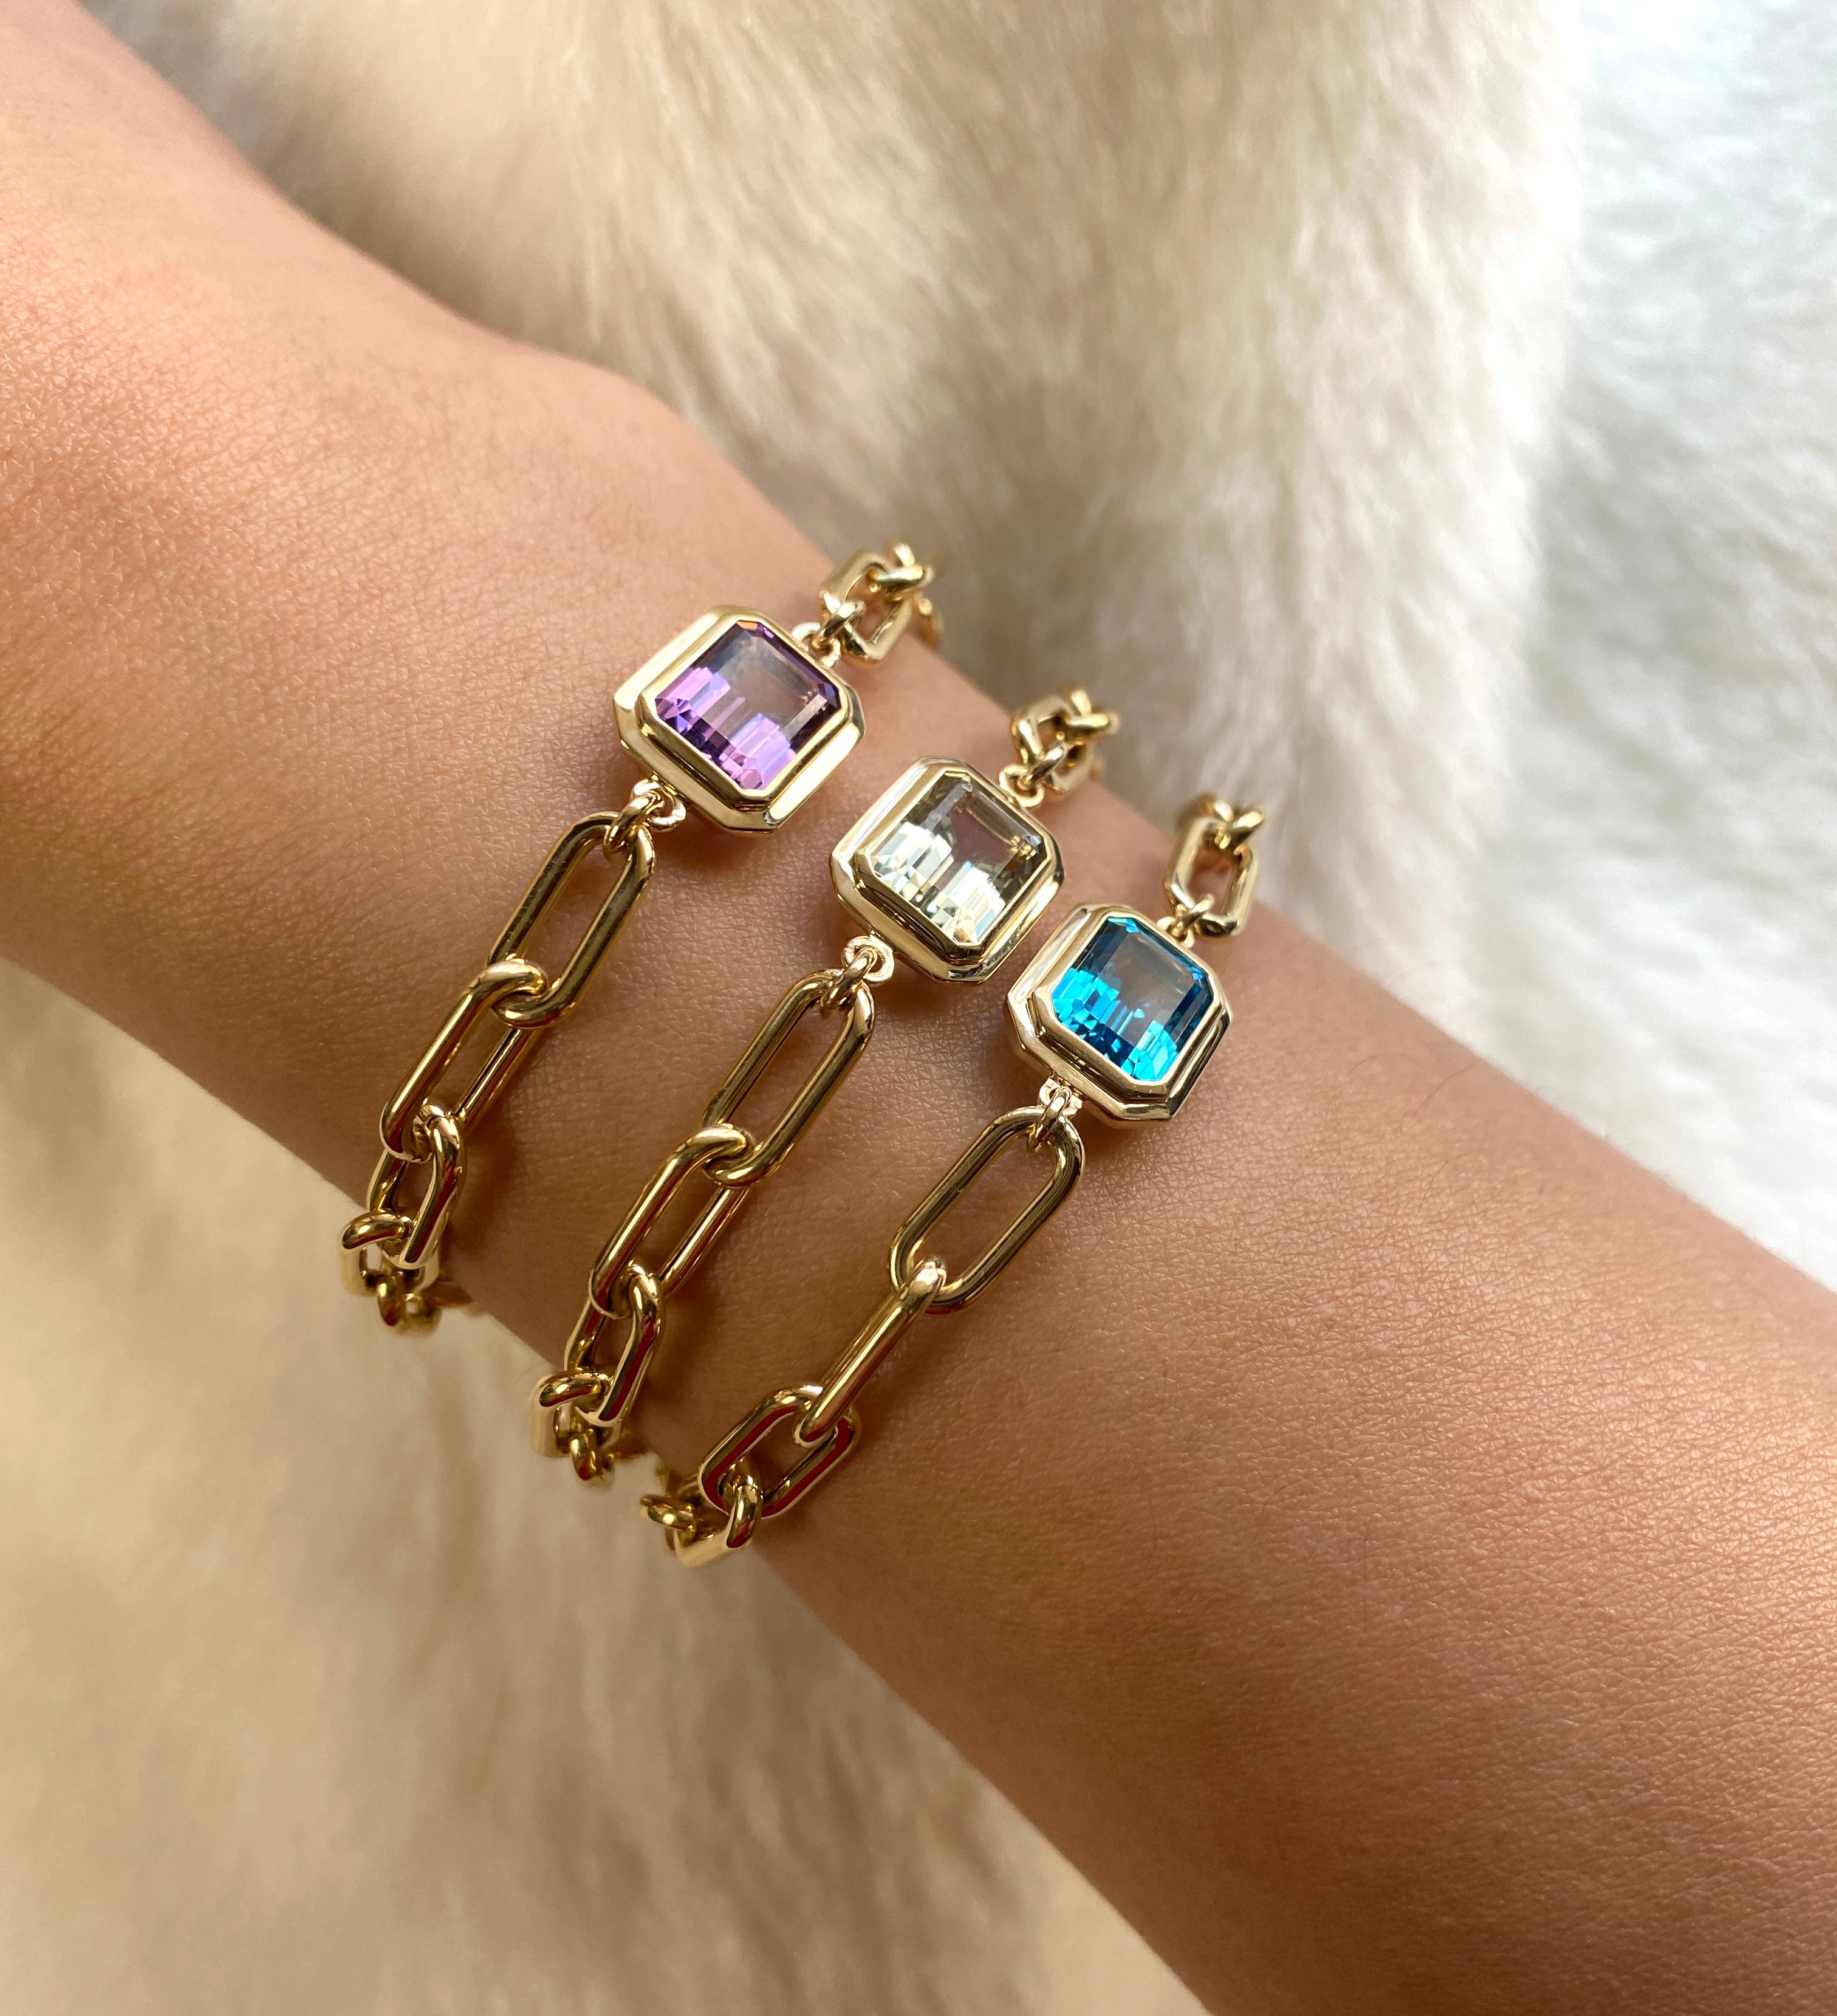 Elevate your style with the Prasiolite Emerald Cut Bezel Set Bracelet in 18K Yellow Gold from our captivating 'Manhattan' Collection. Merging minimalist elegance with confident design, this bracelet captures the essence of New York City's iconic